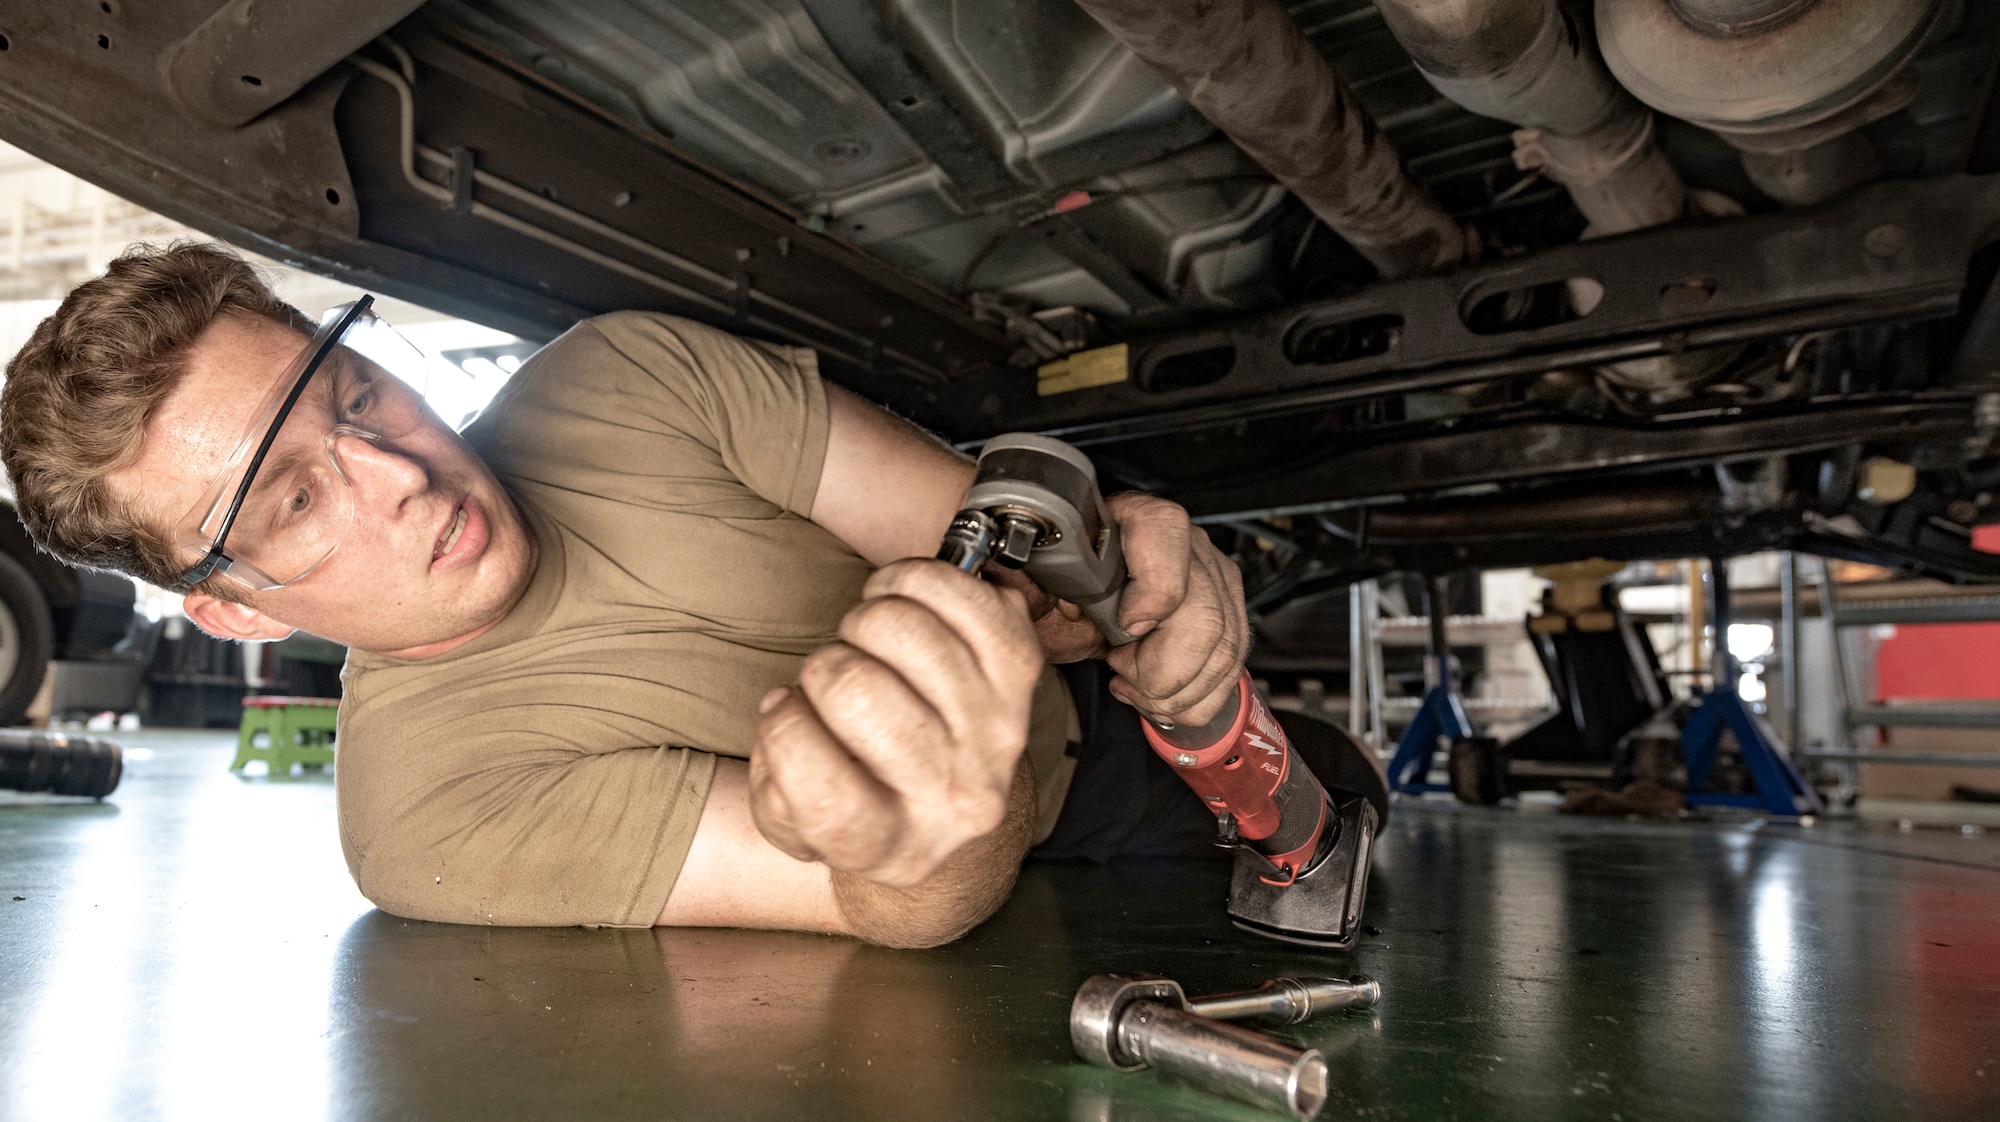 Airman 1st Class Theodore Ellis, 374th Logistics Readiness Squadron Vehicle Maintenance Flight journeyman, prepares a tool needed to reinstall the vehicle's transmission after repairing an oil leak at Yokota Air Base, Japan, Aug. 17, 2022.